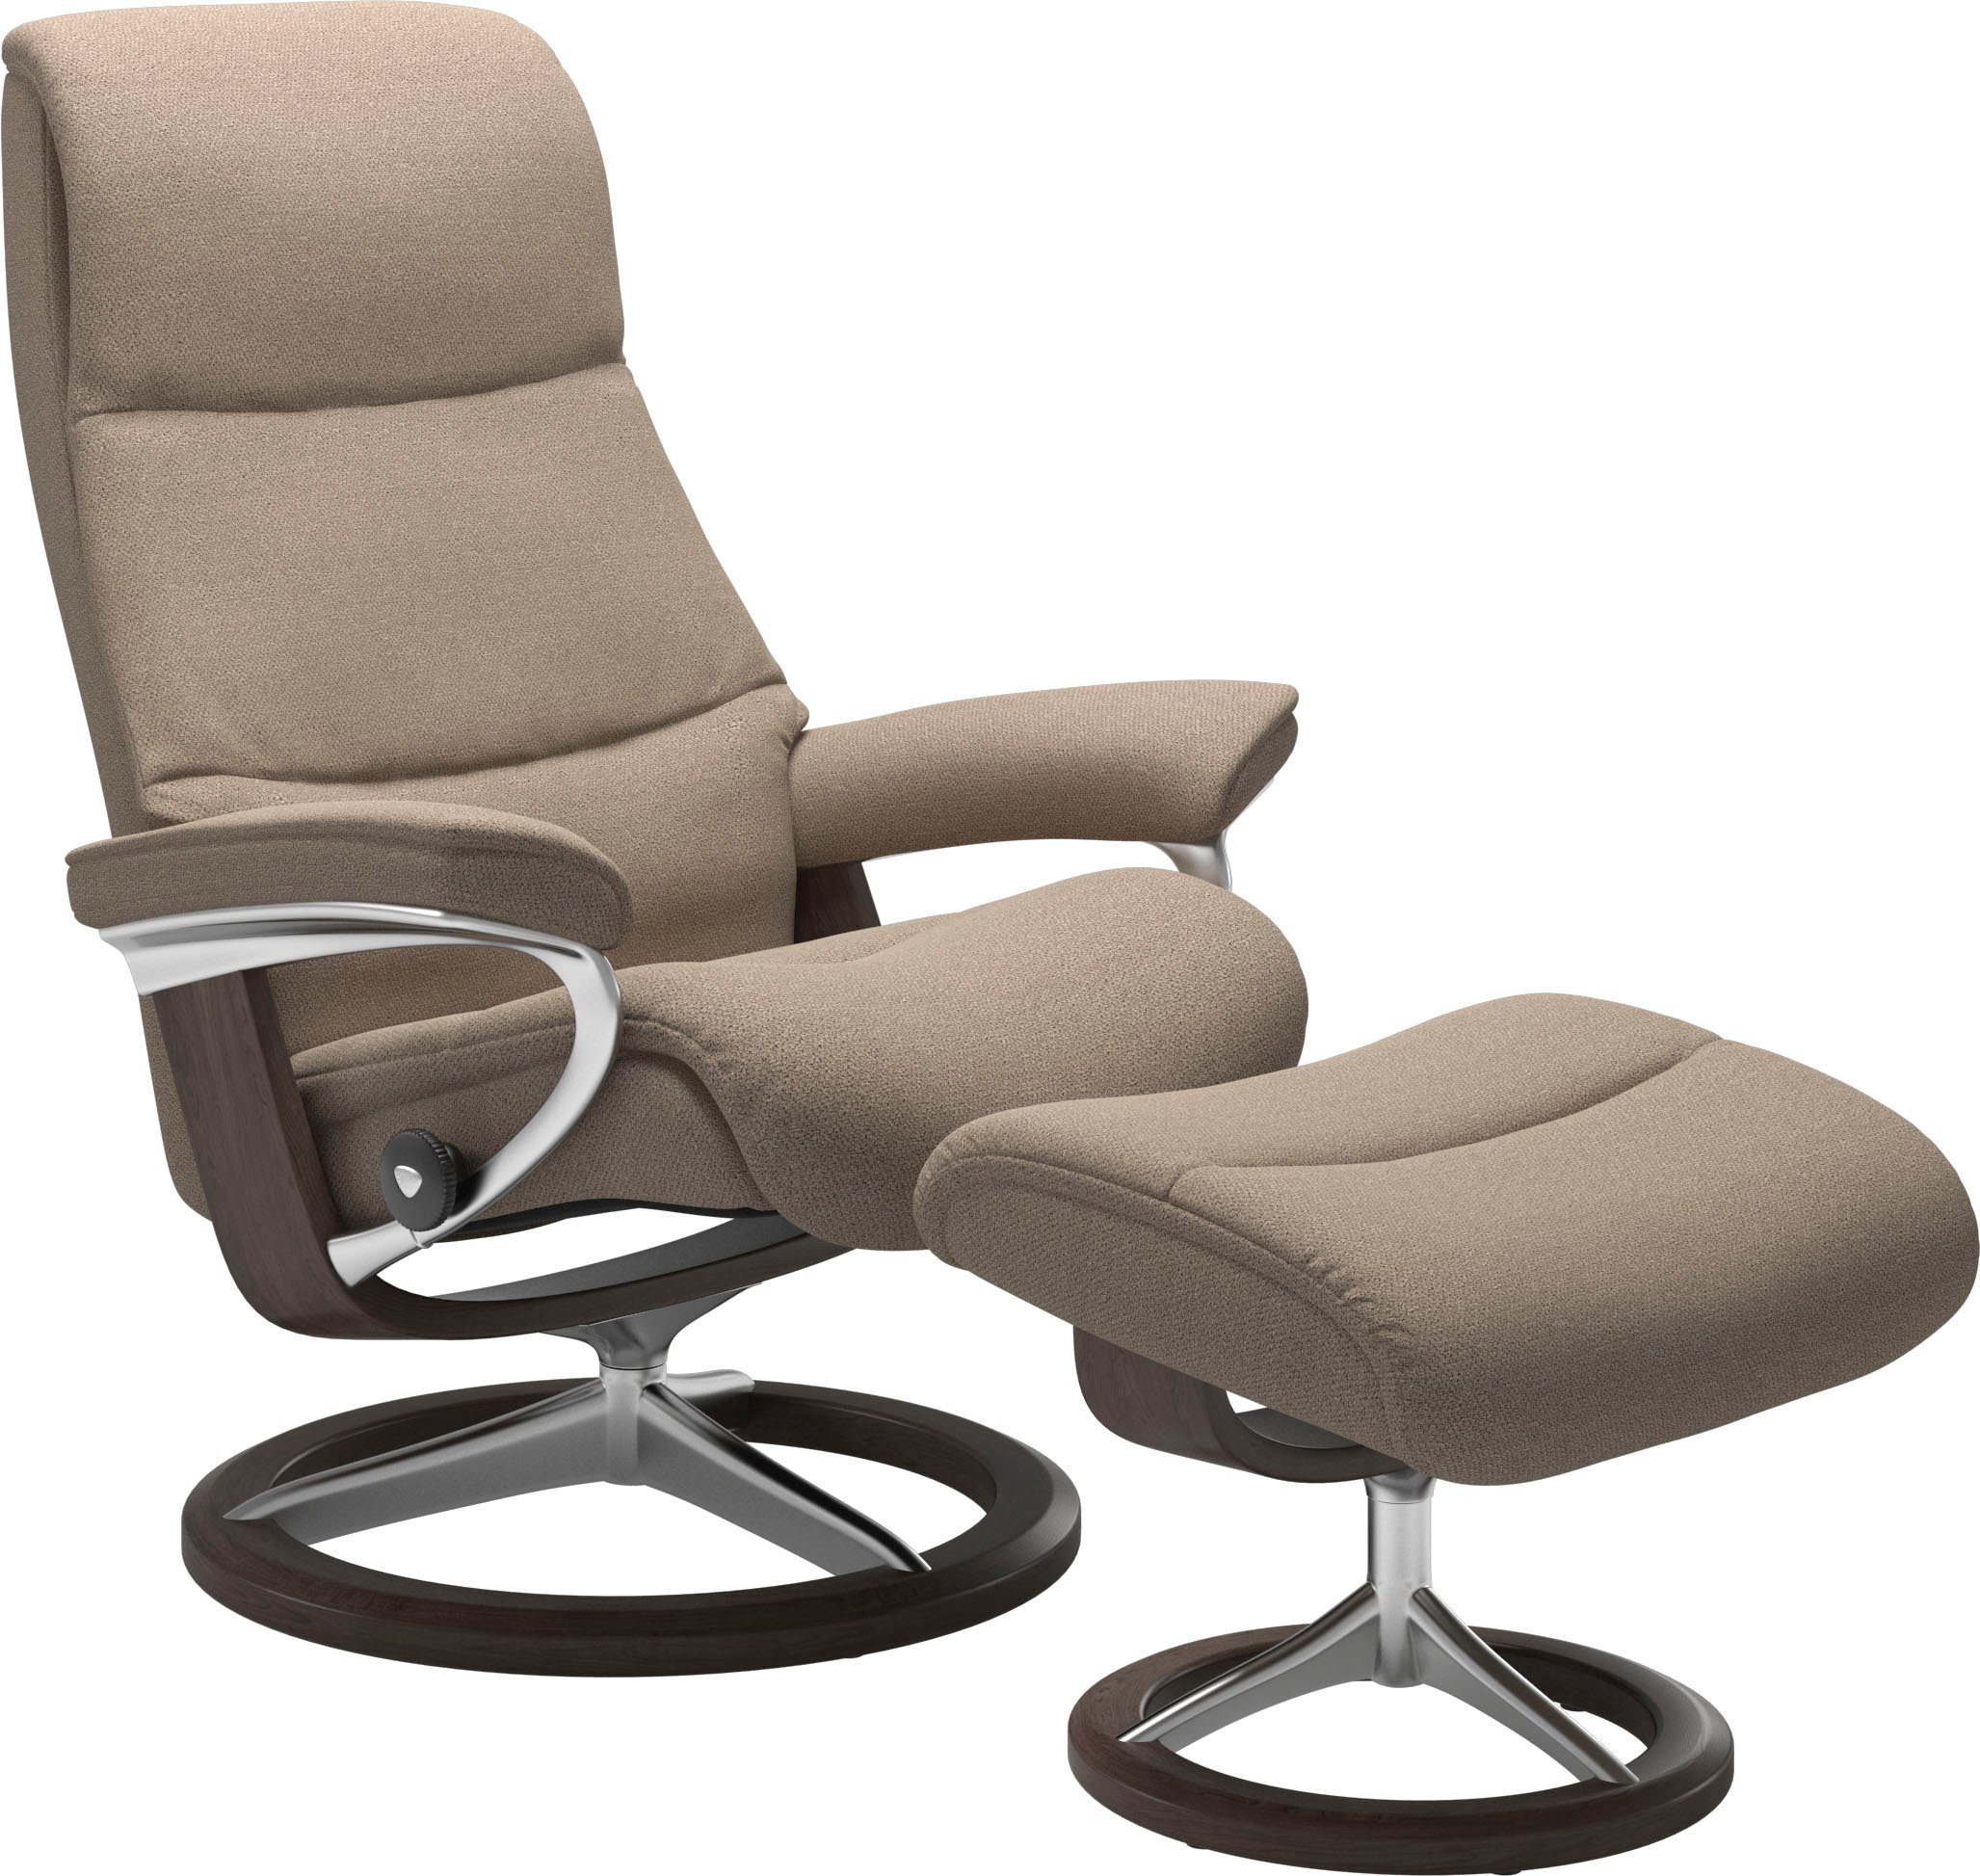 Stressless® Relaxsessel View, mit Signature Base, Größe L,Gestell Wenge | Funktionssessel